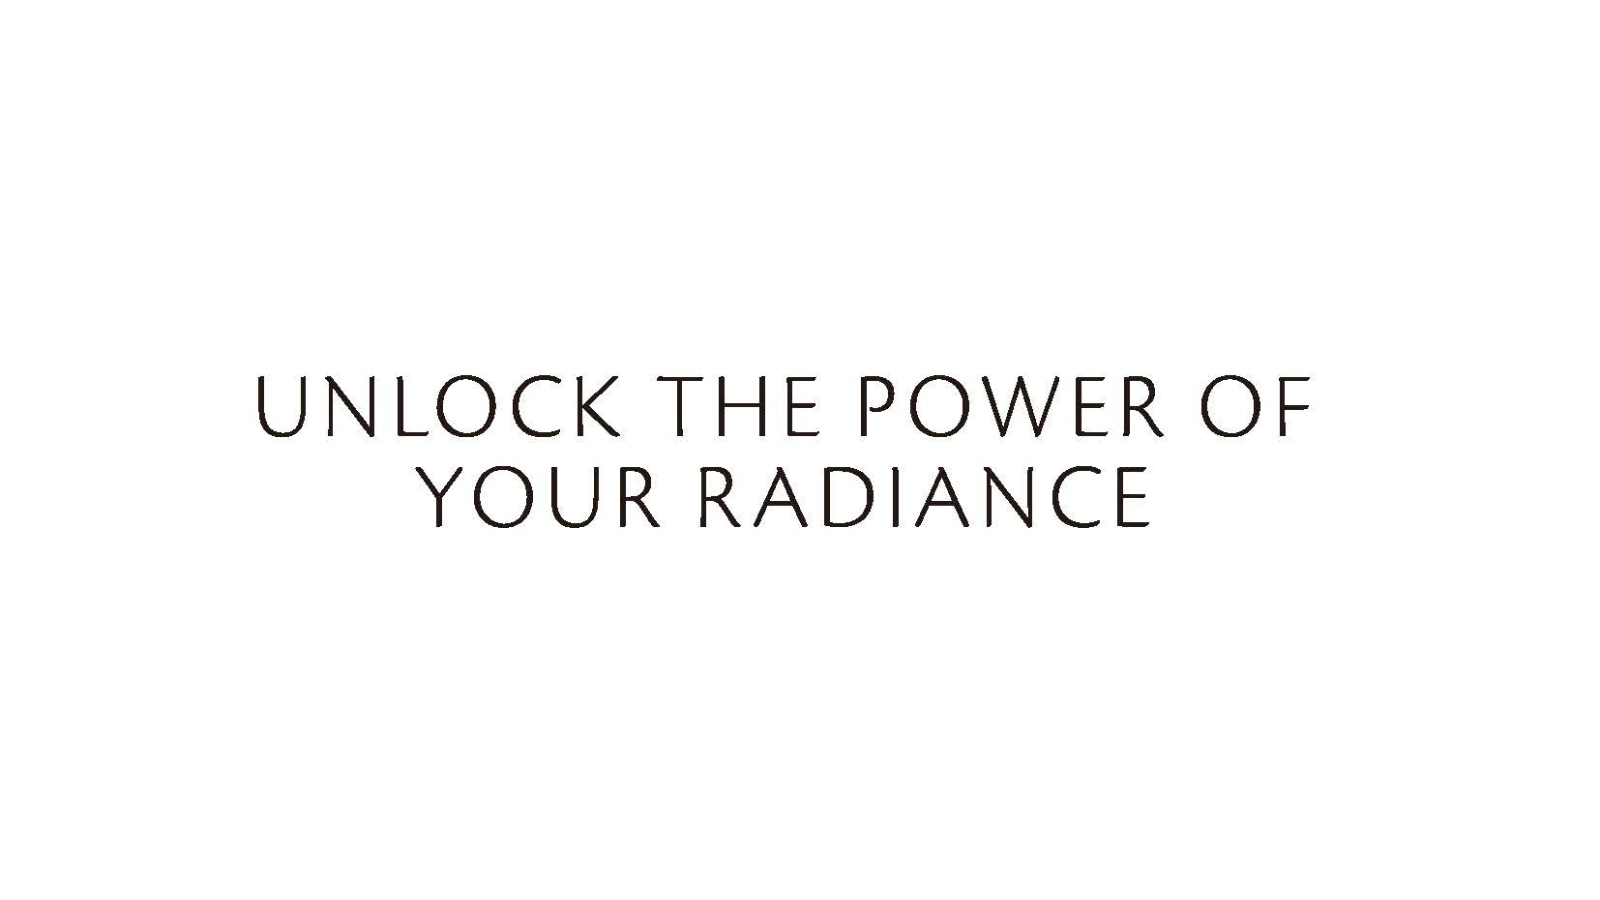 “unlock the power of your radiance”